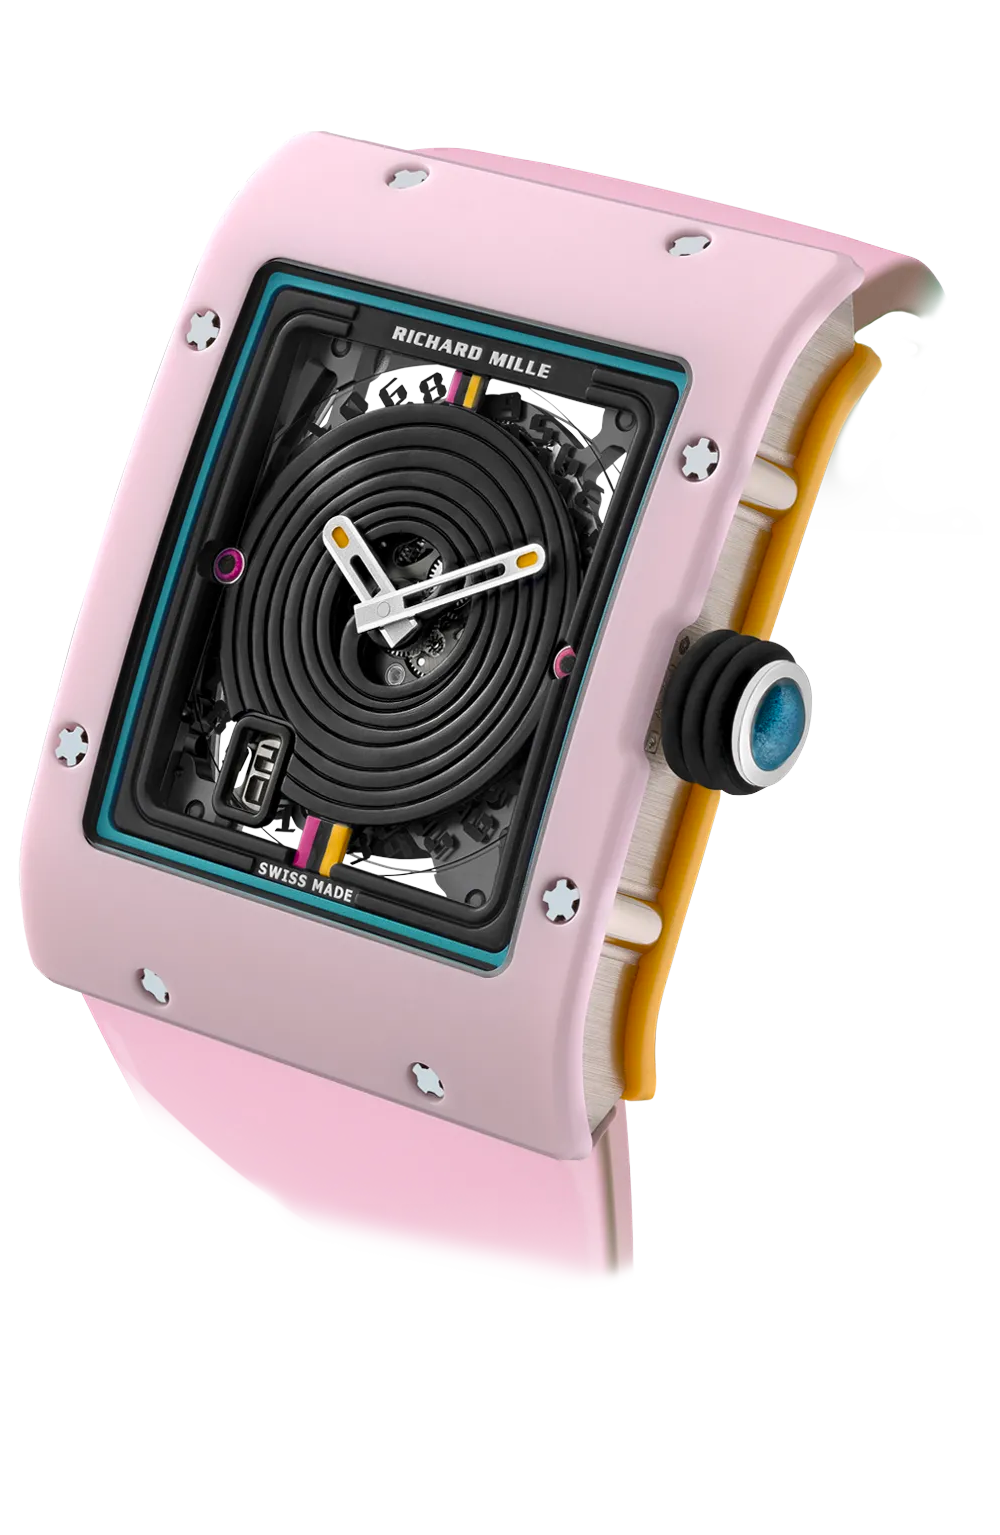 BONBON COLLECTION : Watch Automatic Winding Calibres | RICHARD MILLE